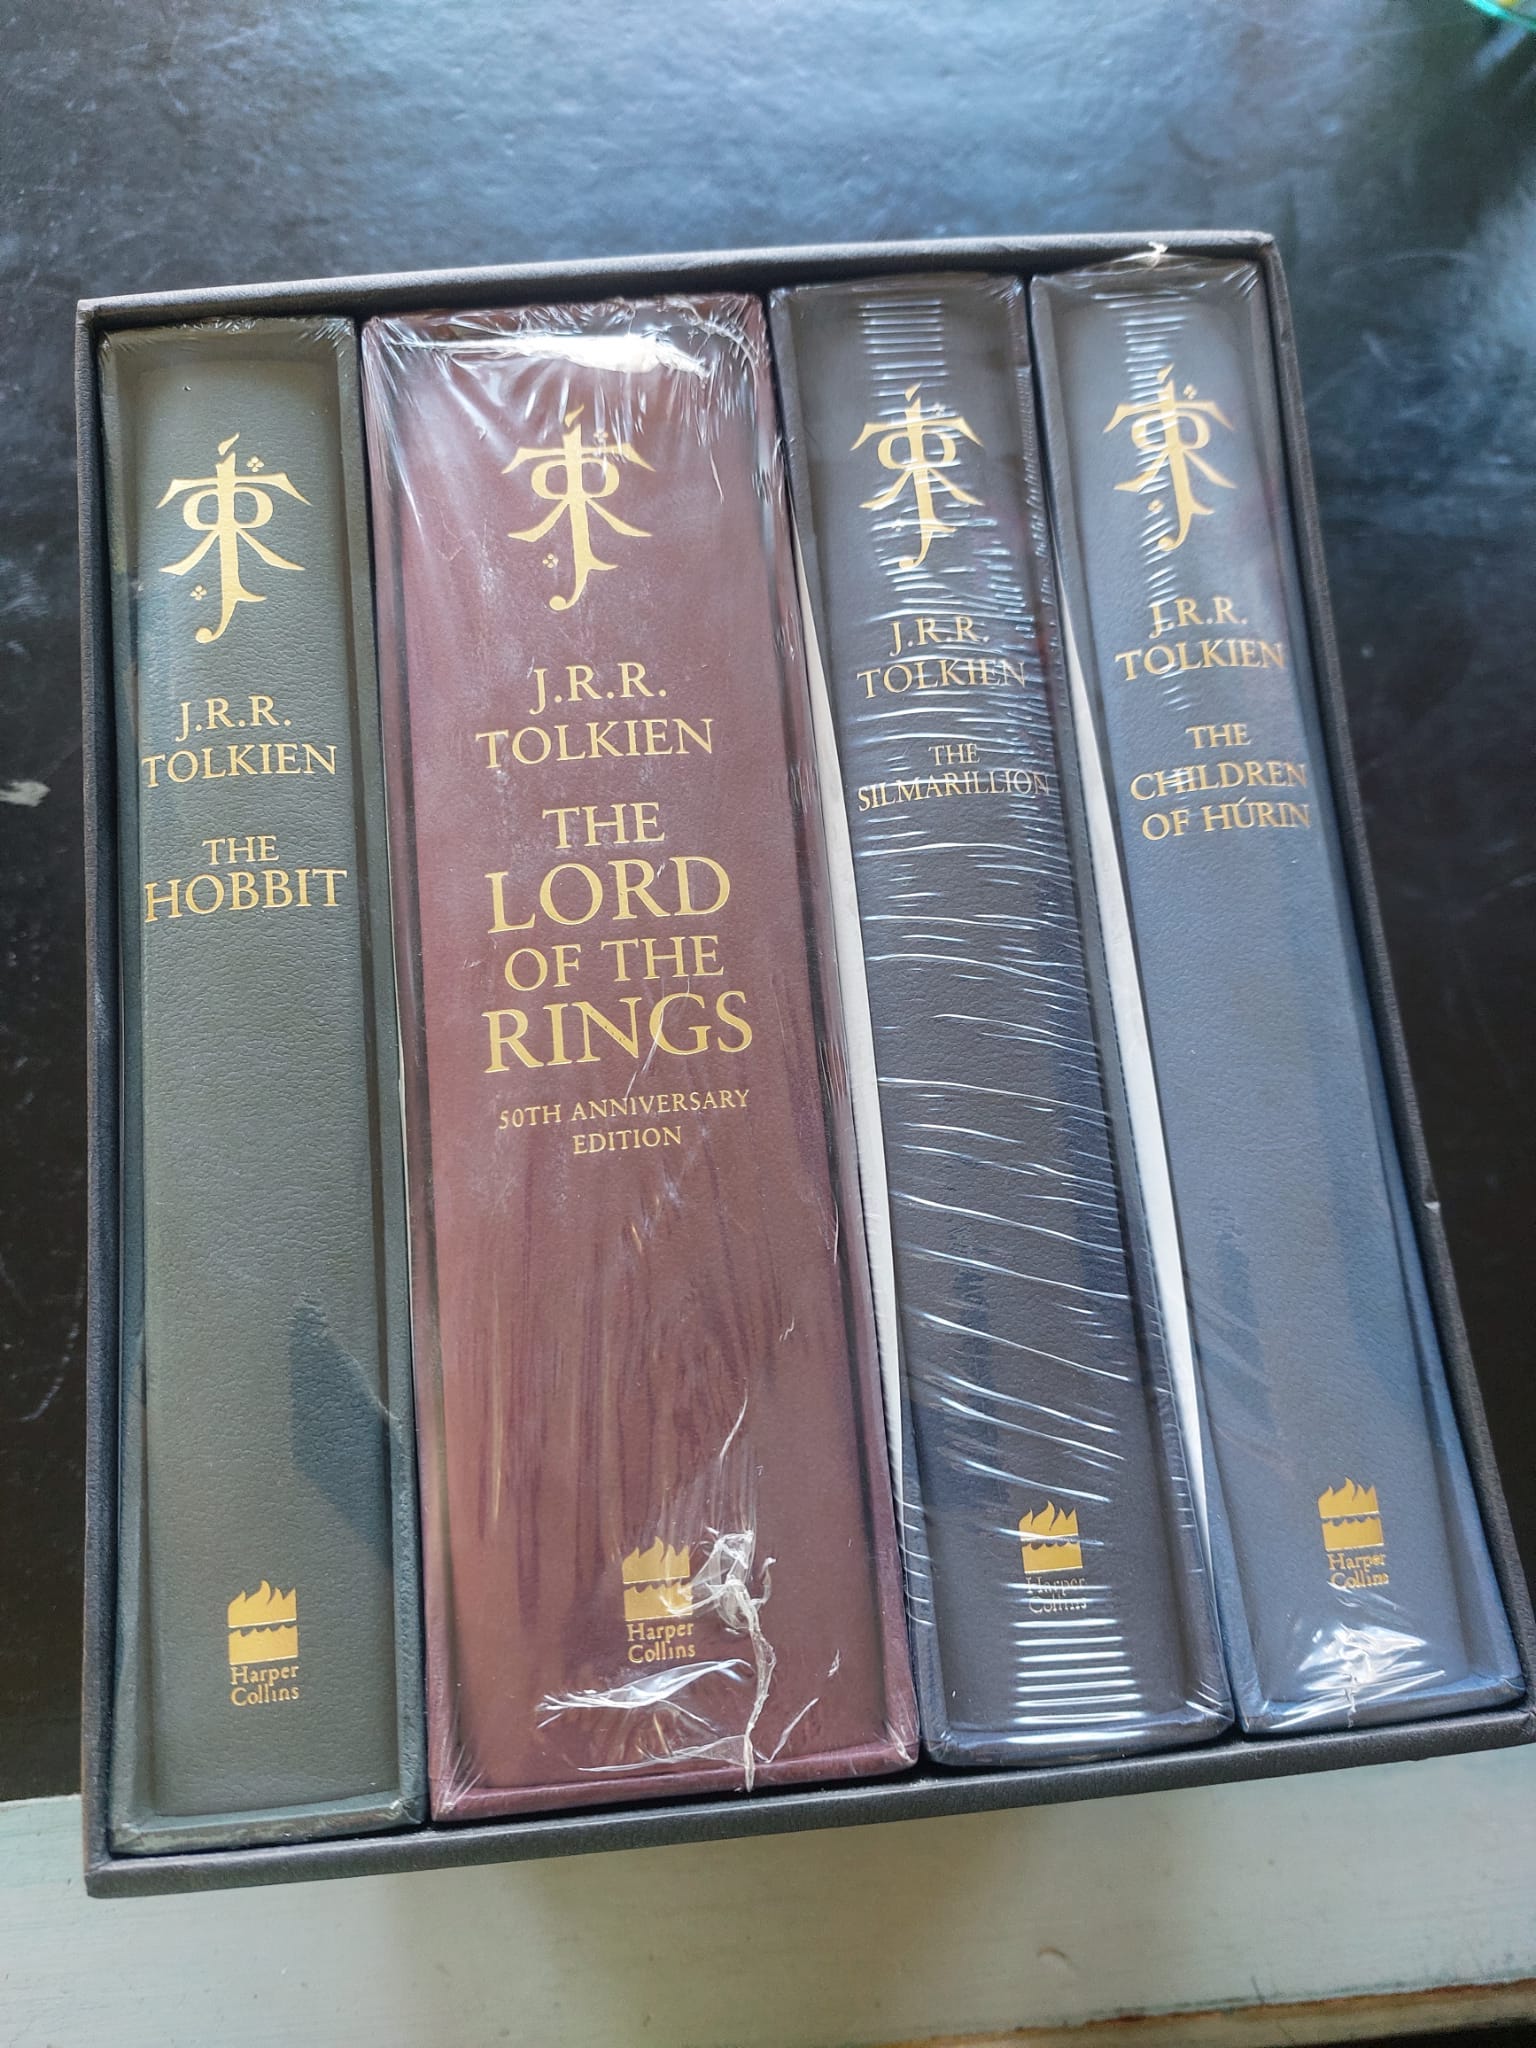 
The J.R.R. Tolkien Deluxe Edition Collection in Original Publishers Slipcase, Limited to 500 Sets 1